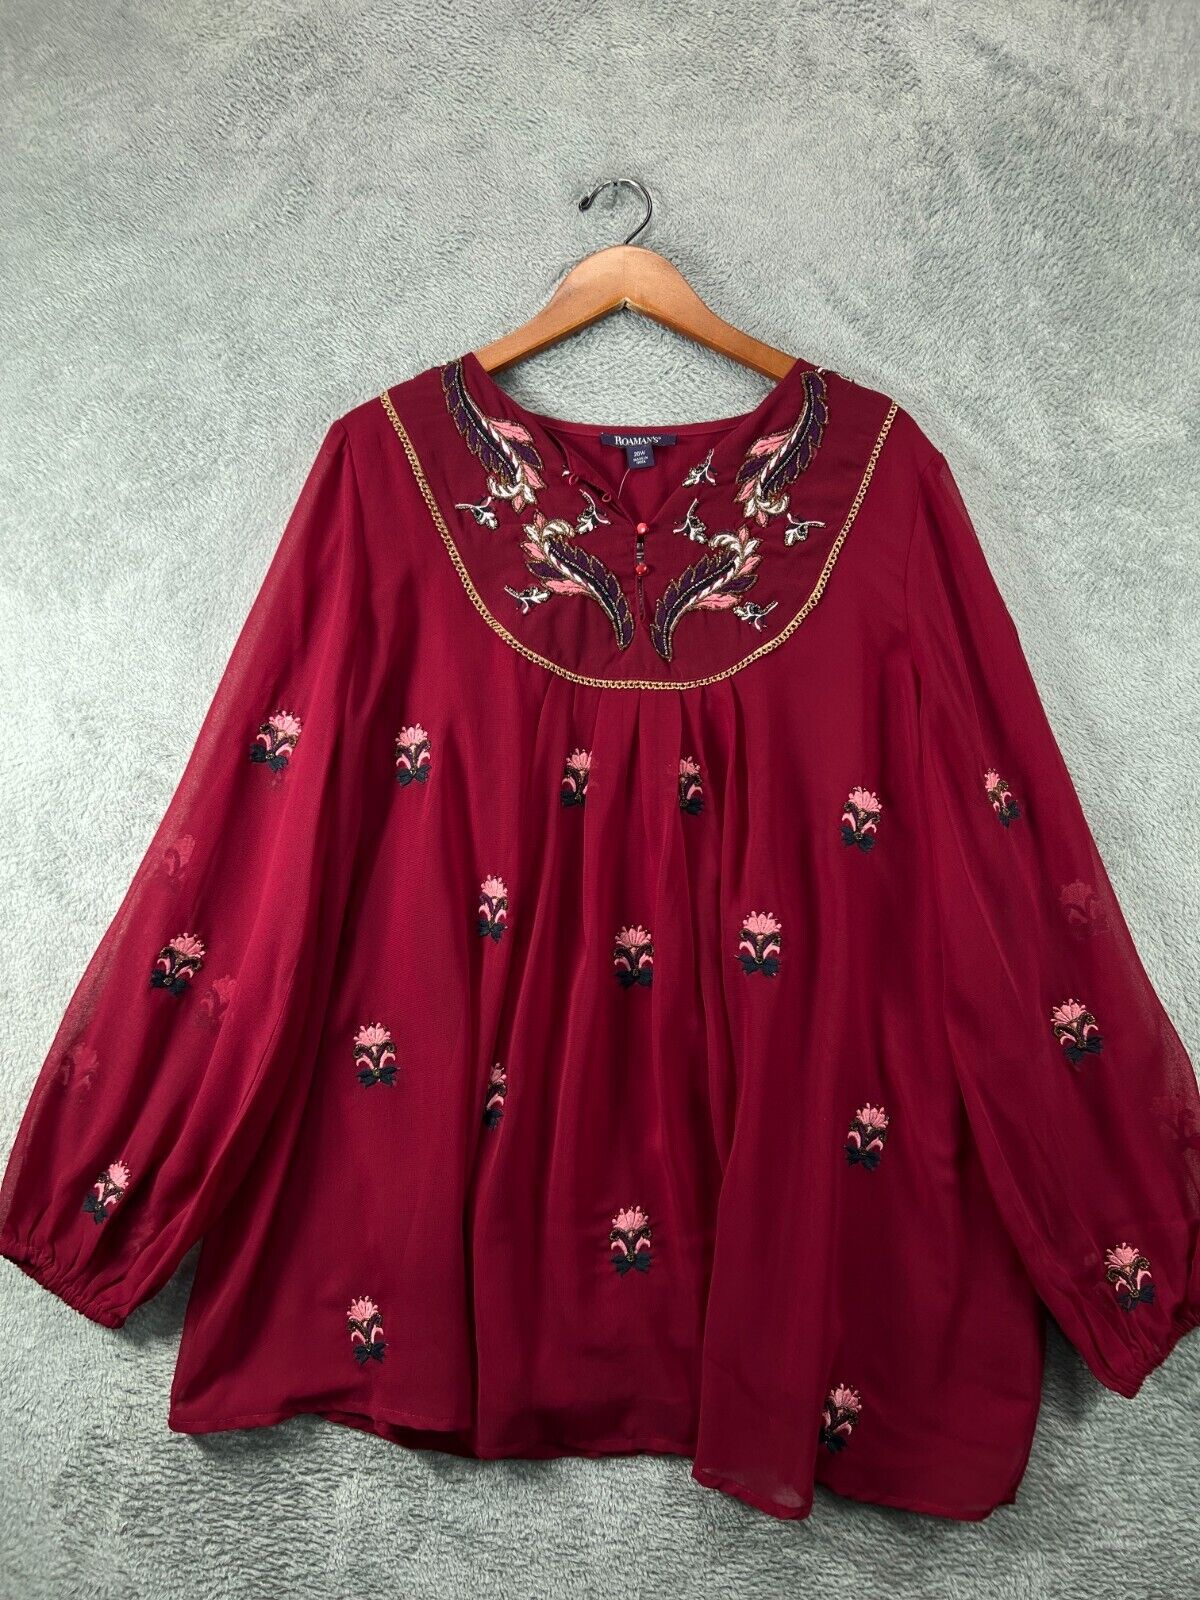 Womens Tops 20W Roamans Red Sheer Embroidered Beaded Balloon Long Sleeve